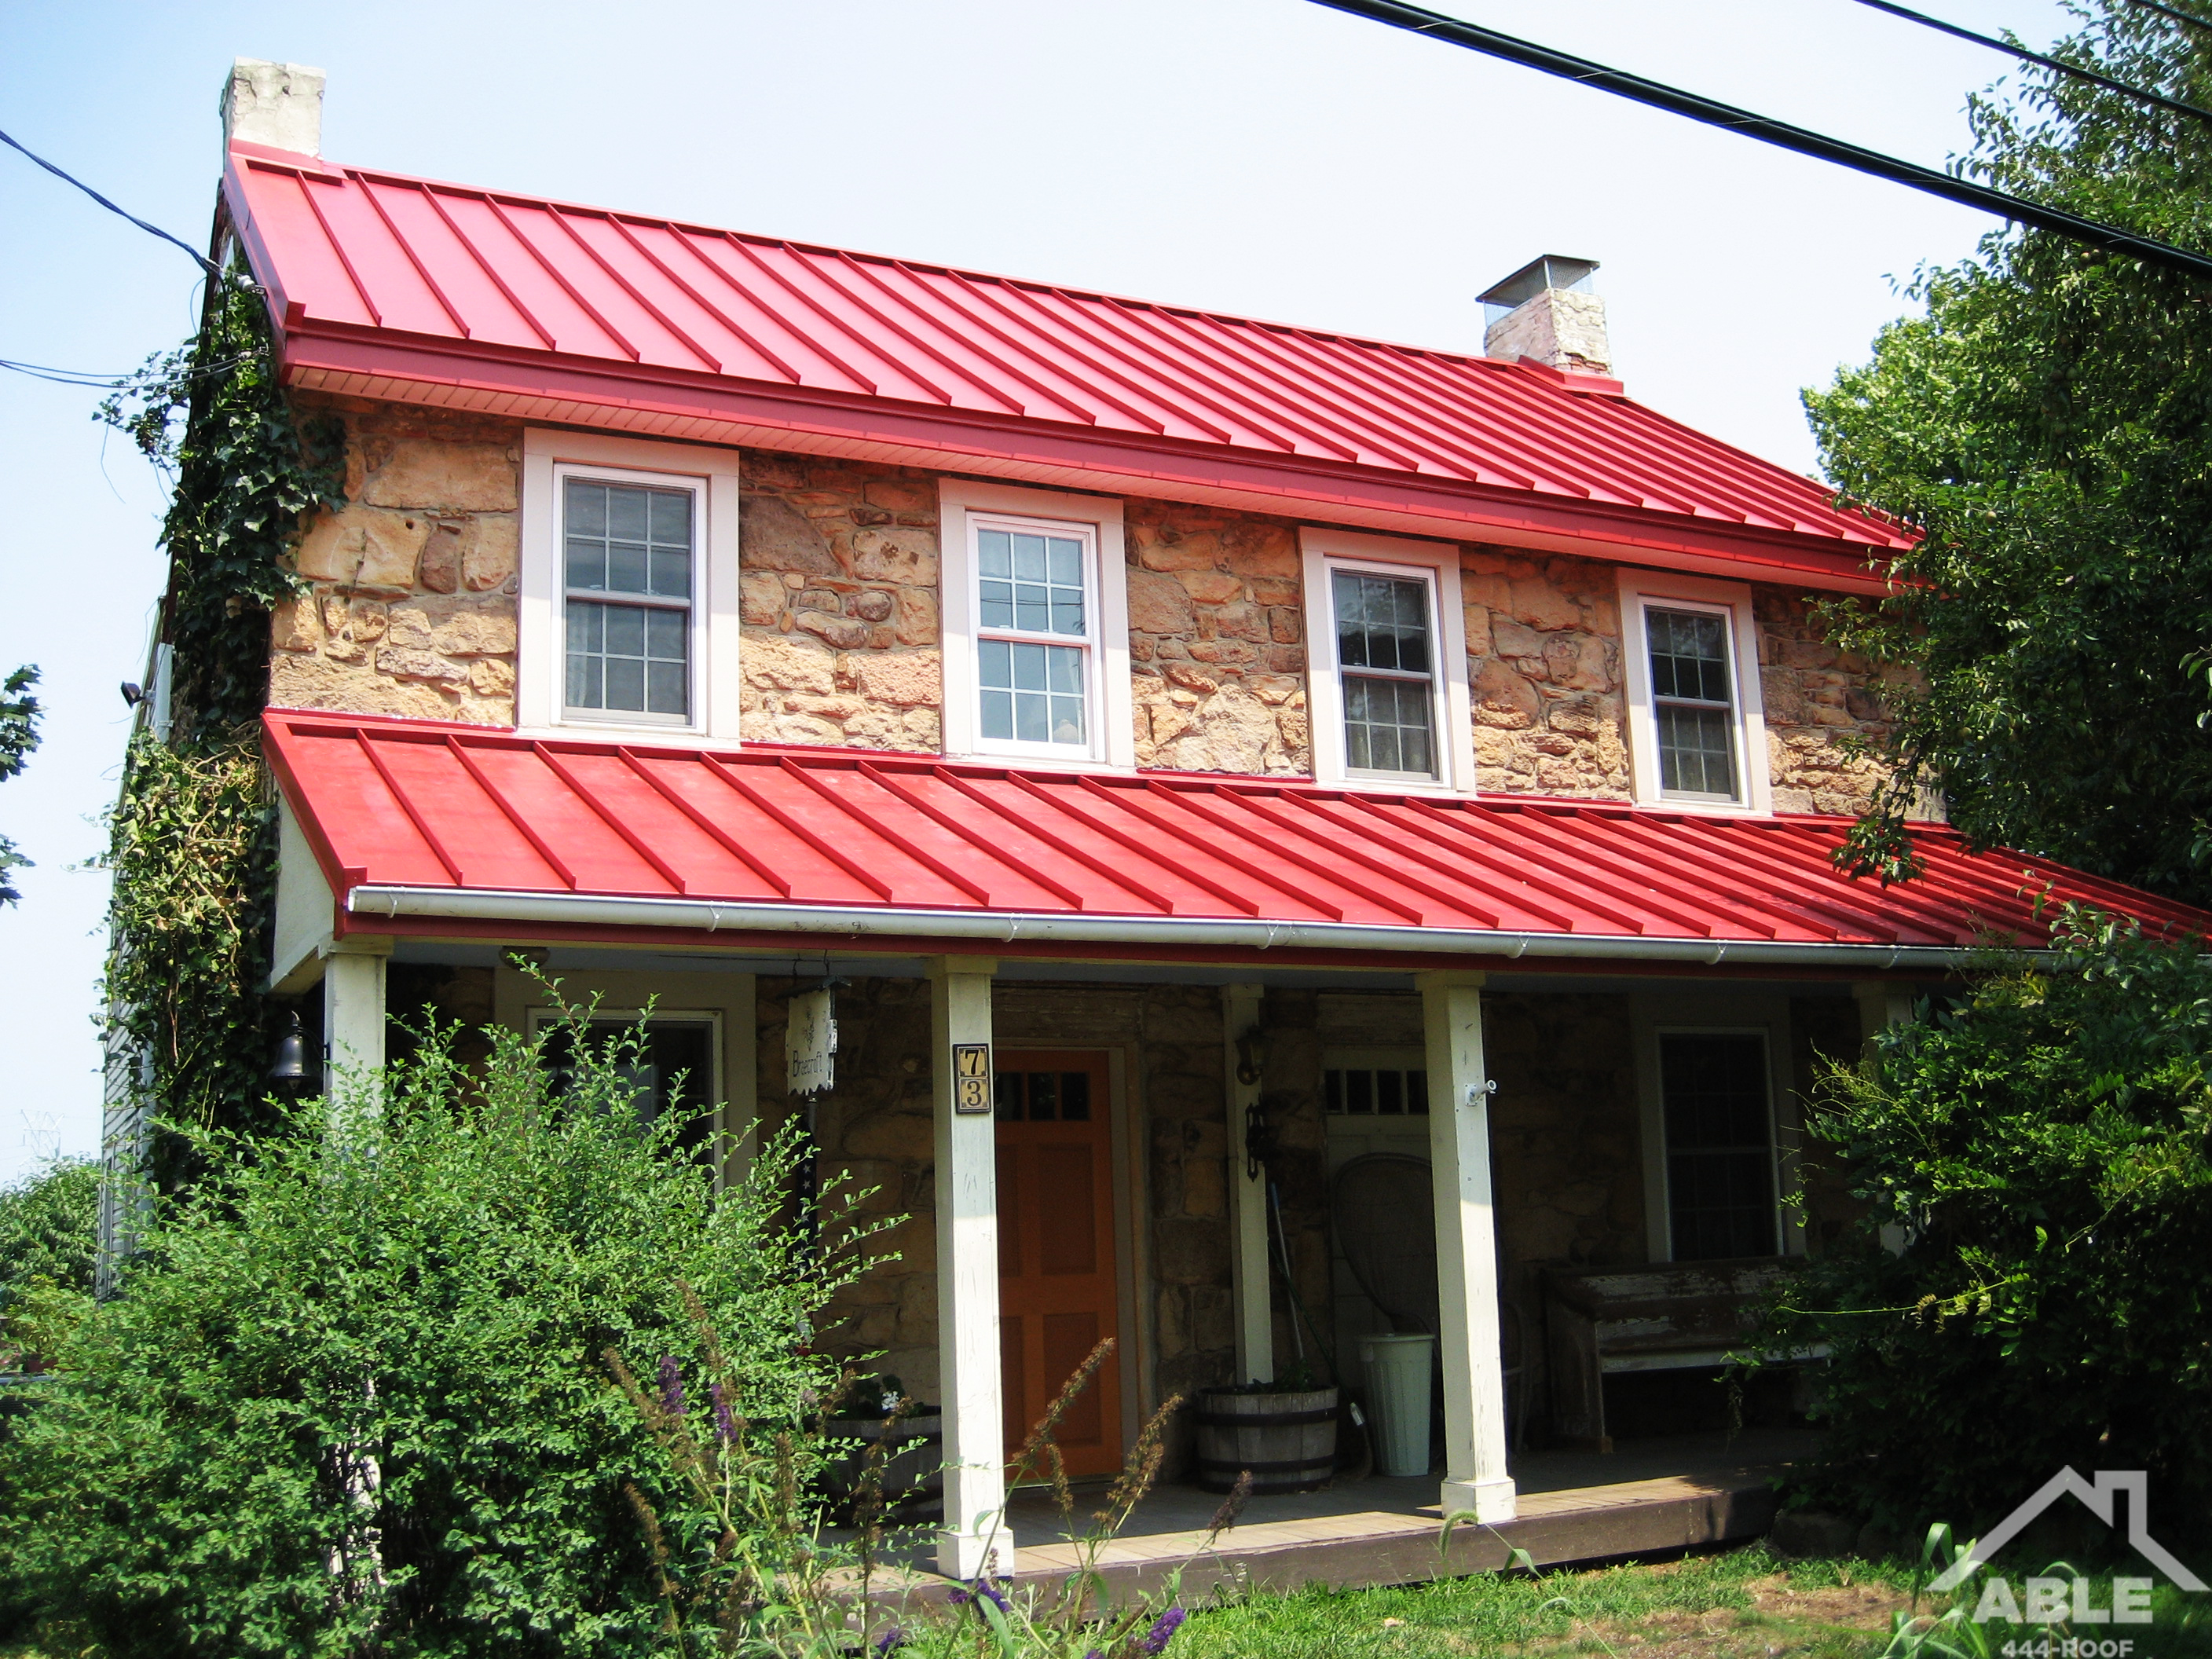 Roofers in Powell Ohio - Metal Roof Installation